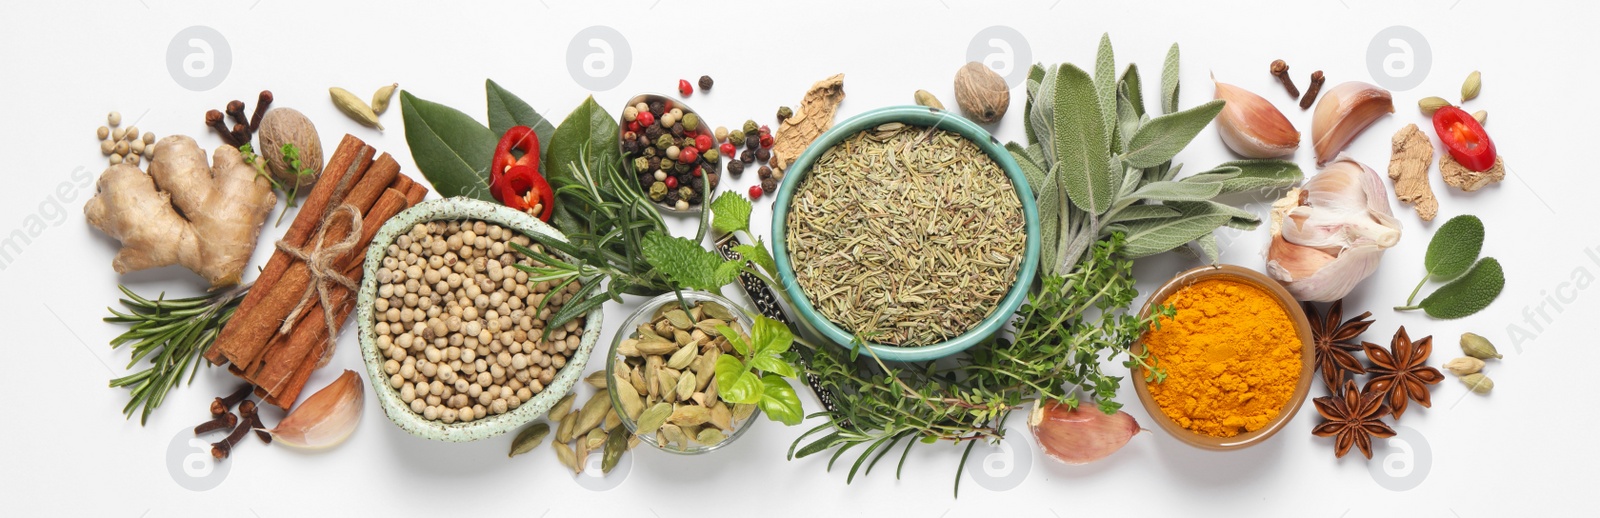 Image of Different fresh herbs and spices on white background, flat lay. Banner design